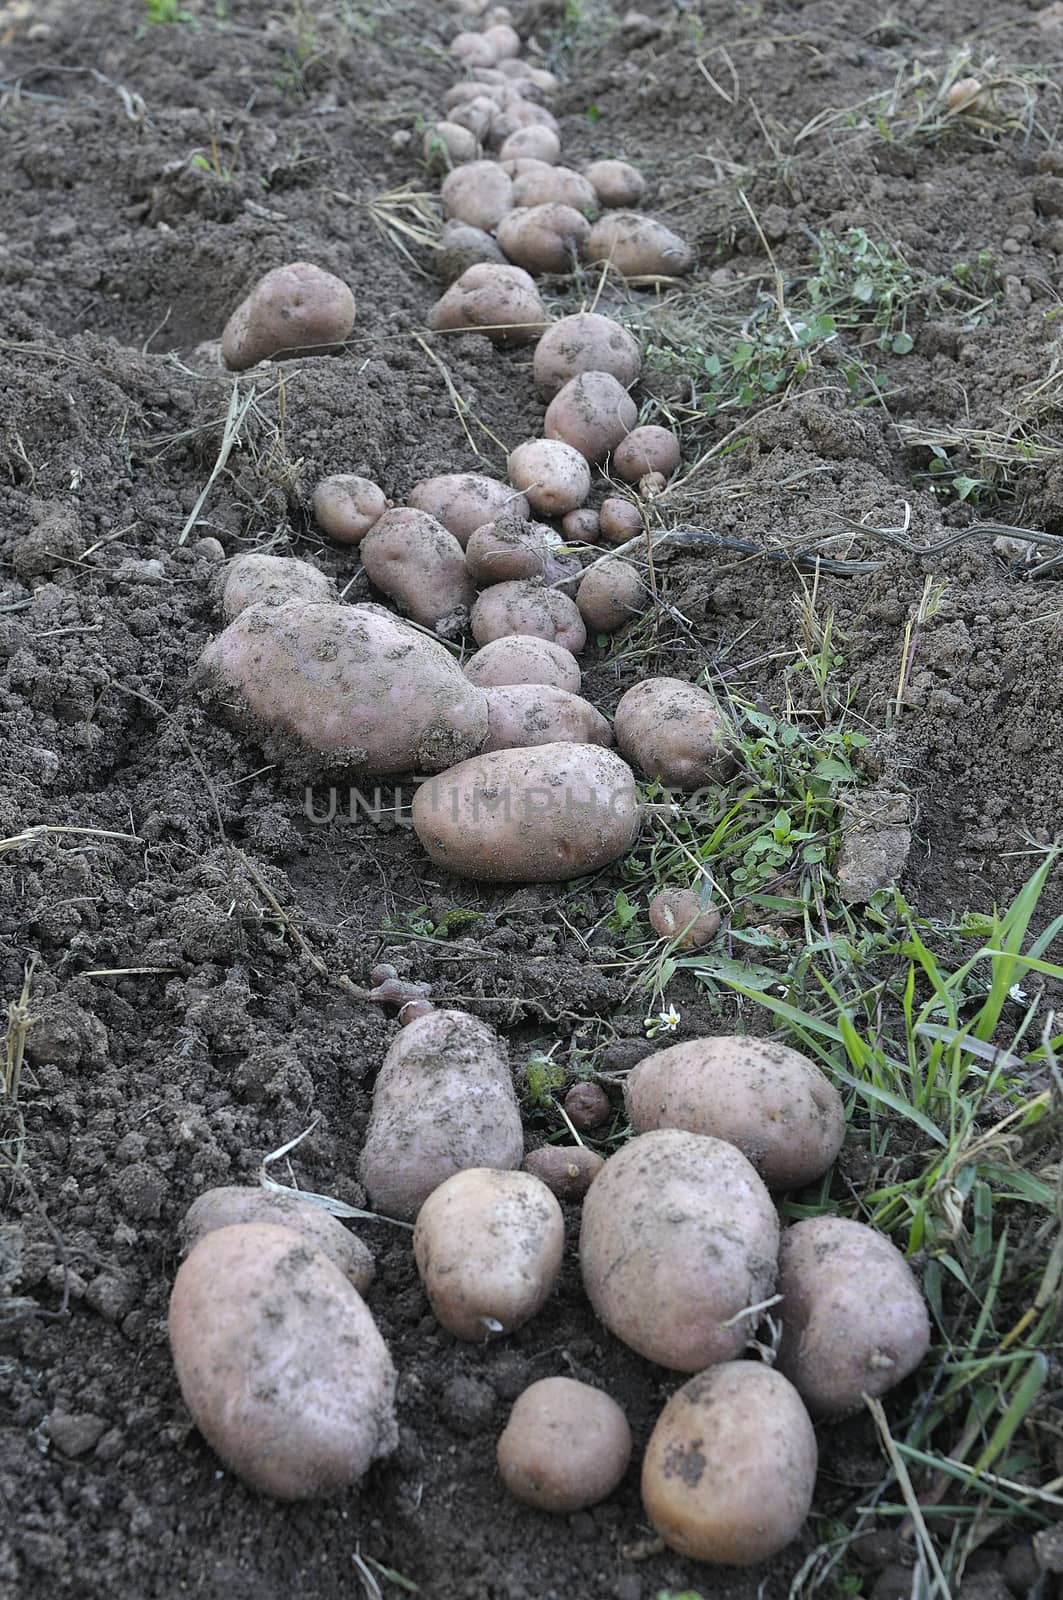 Cultivation and harvesting of potatoes in the garden